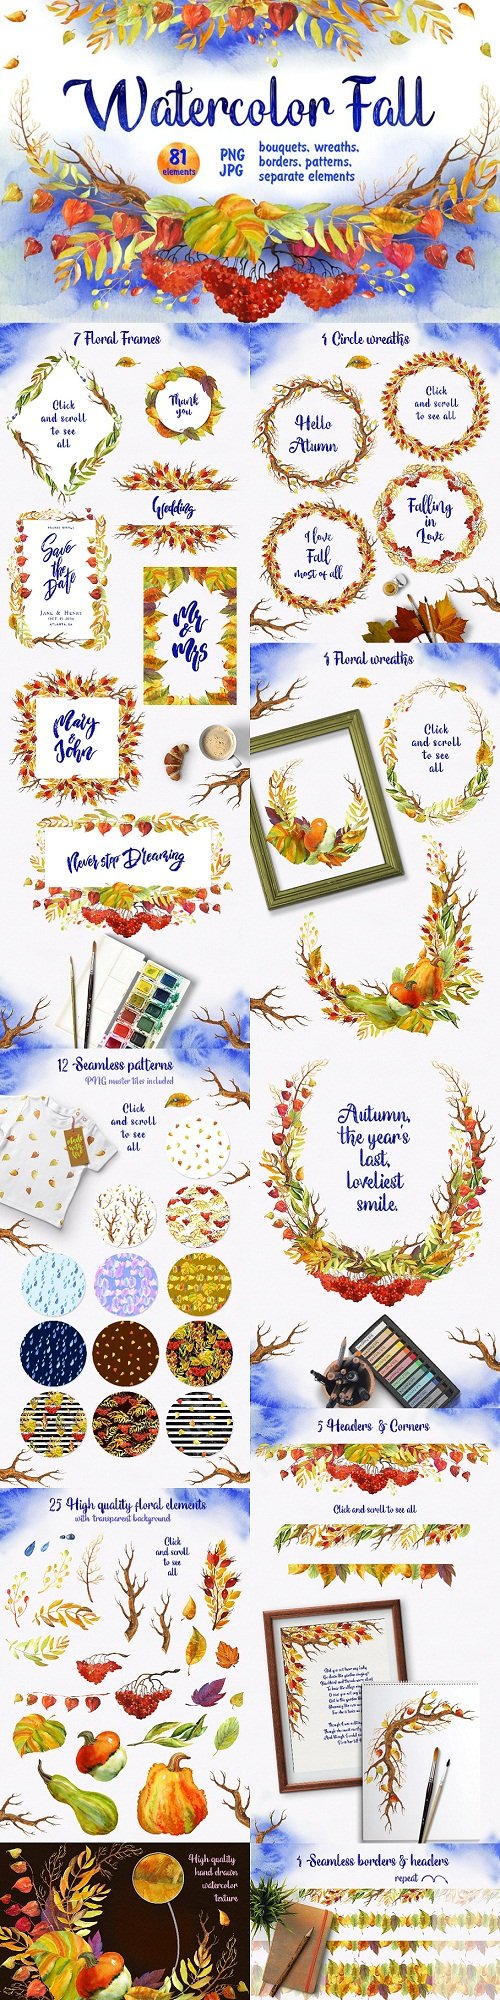 Watercolor Fall Floral Clipart - 1759675